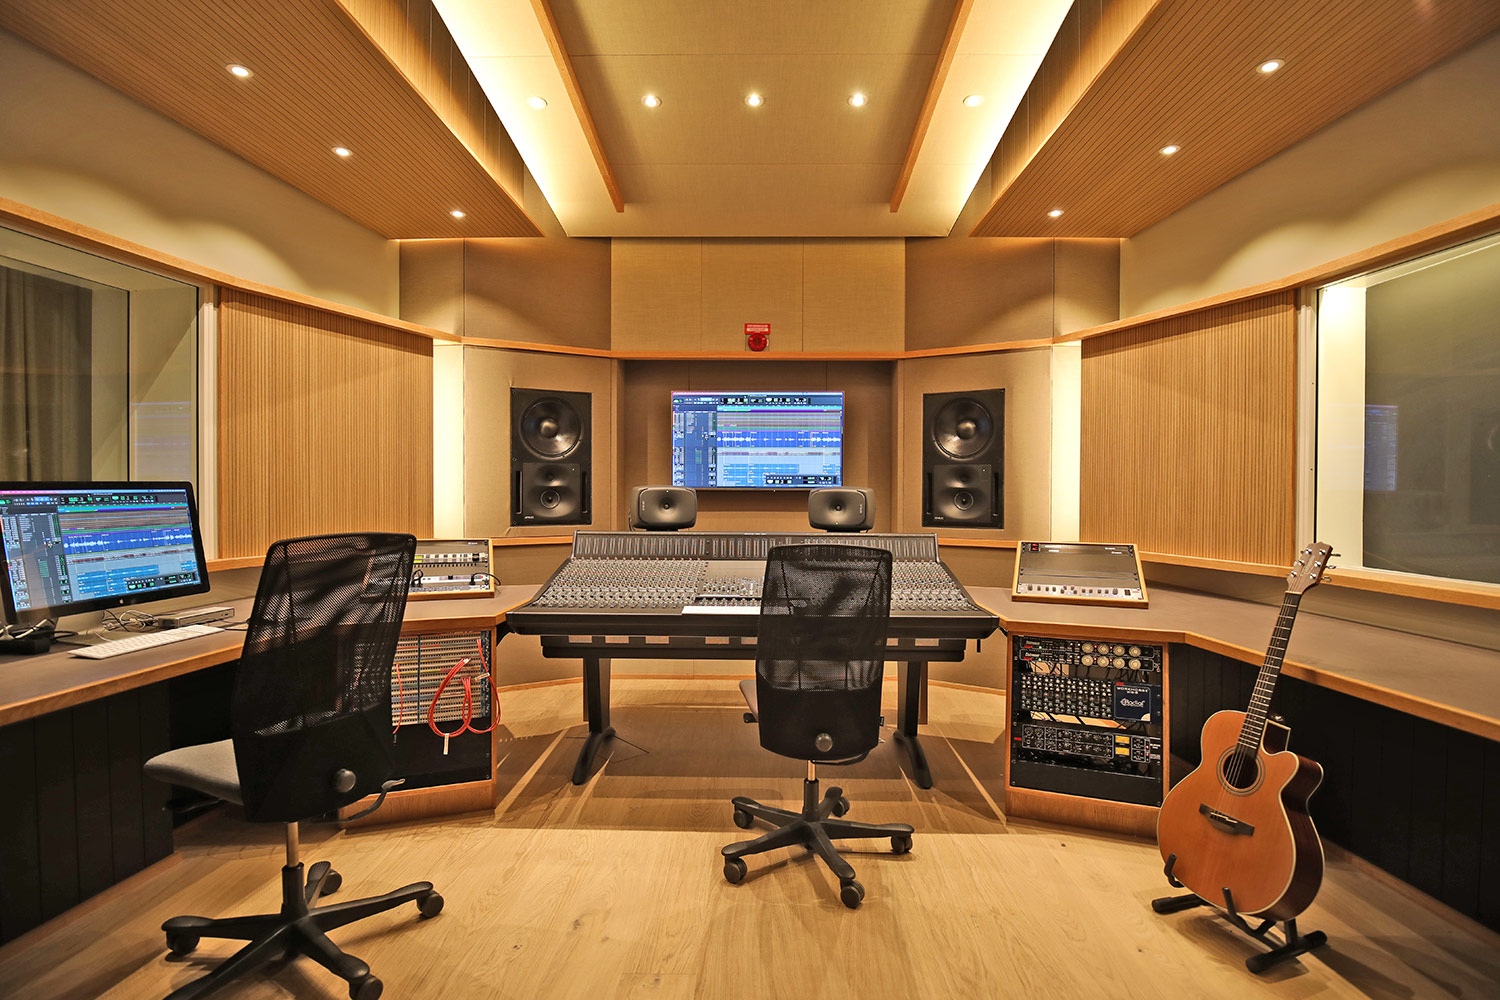 WSDG design the new studios at the Royal College of Music in Stockholm, Sweden.